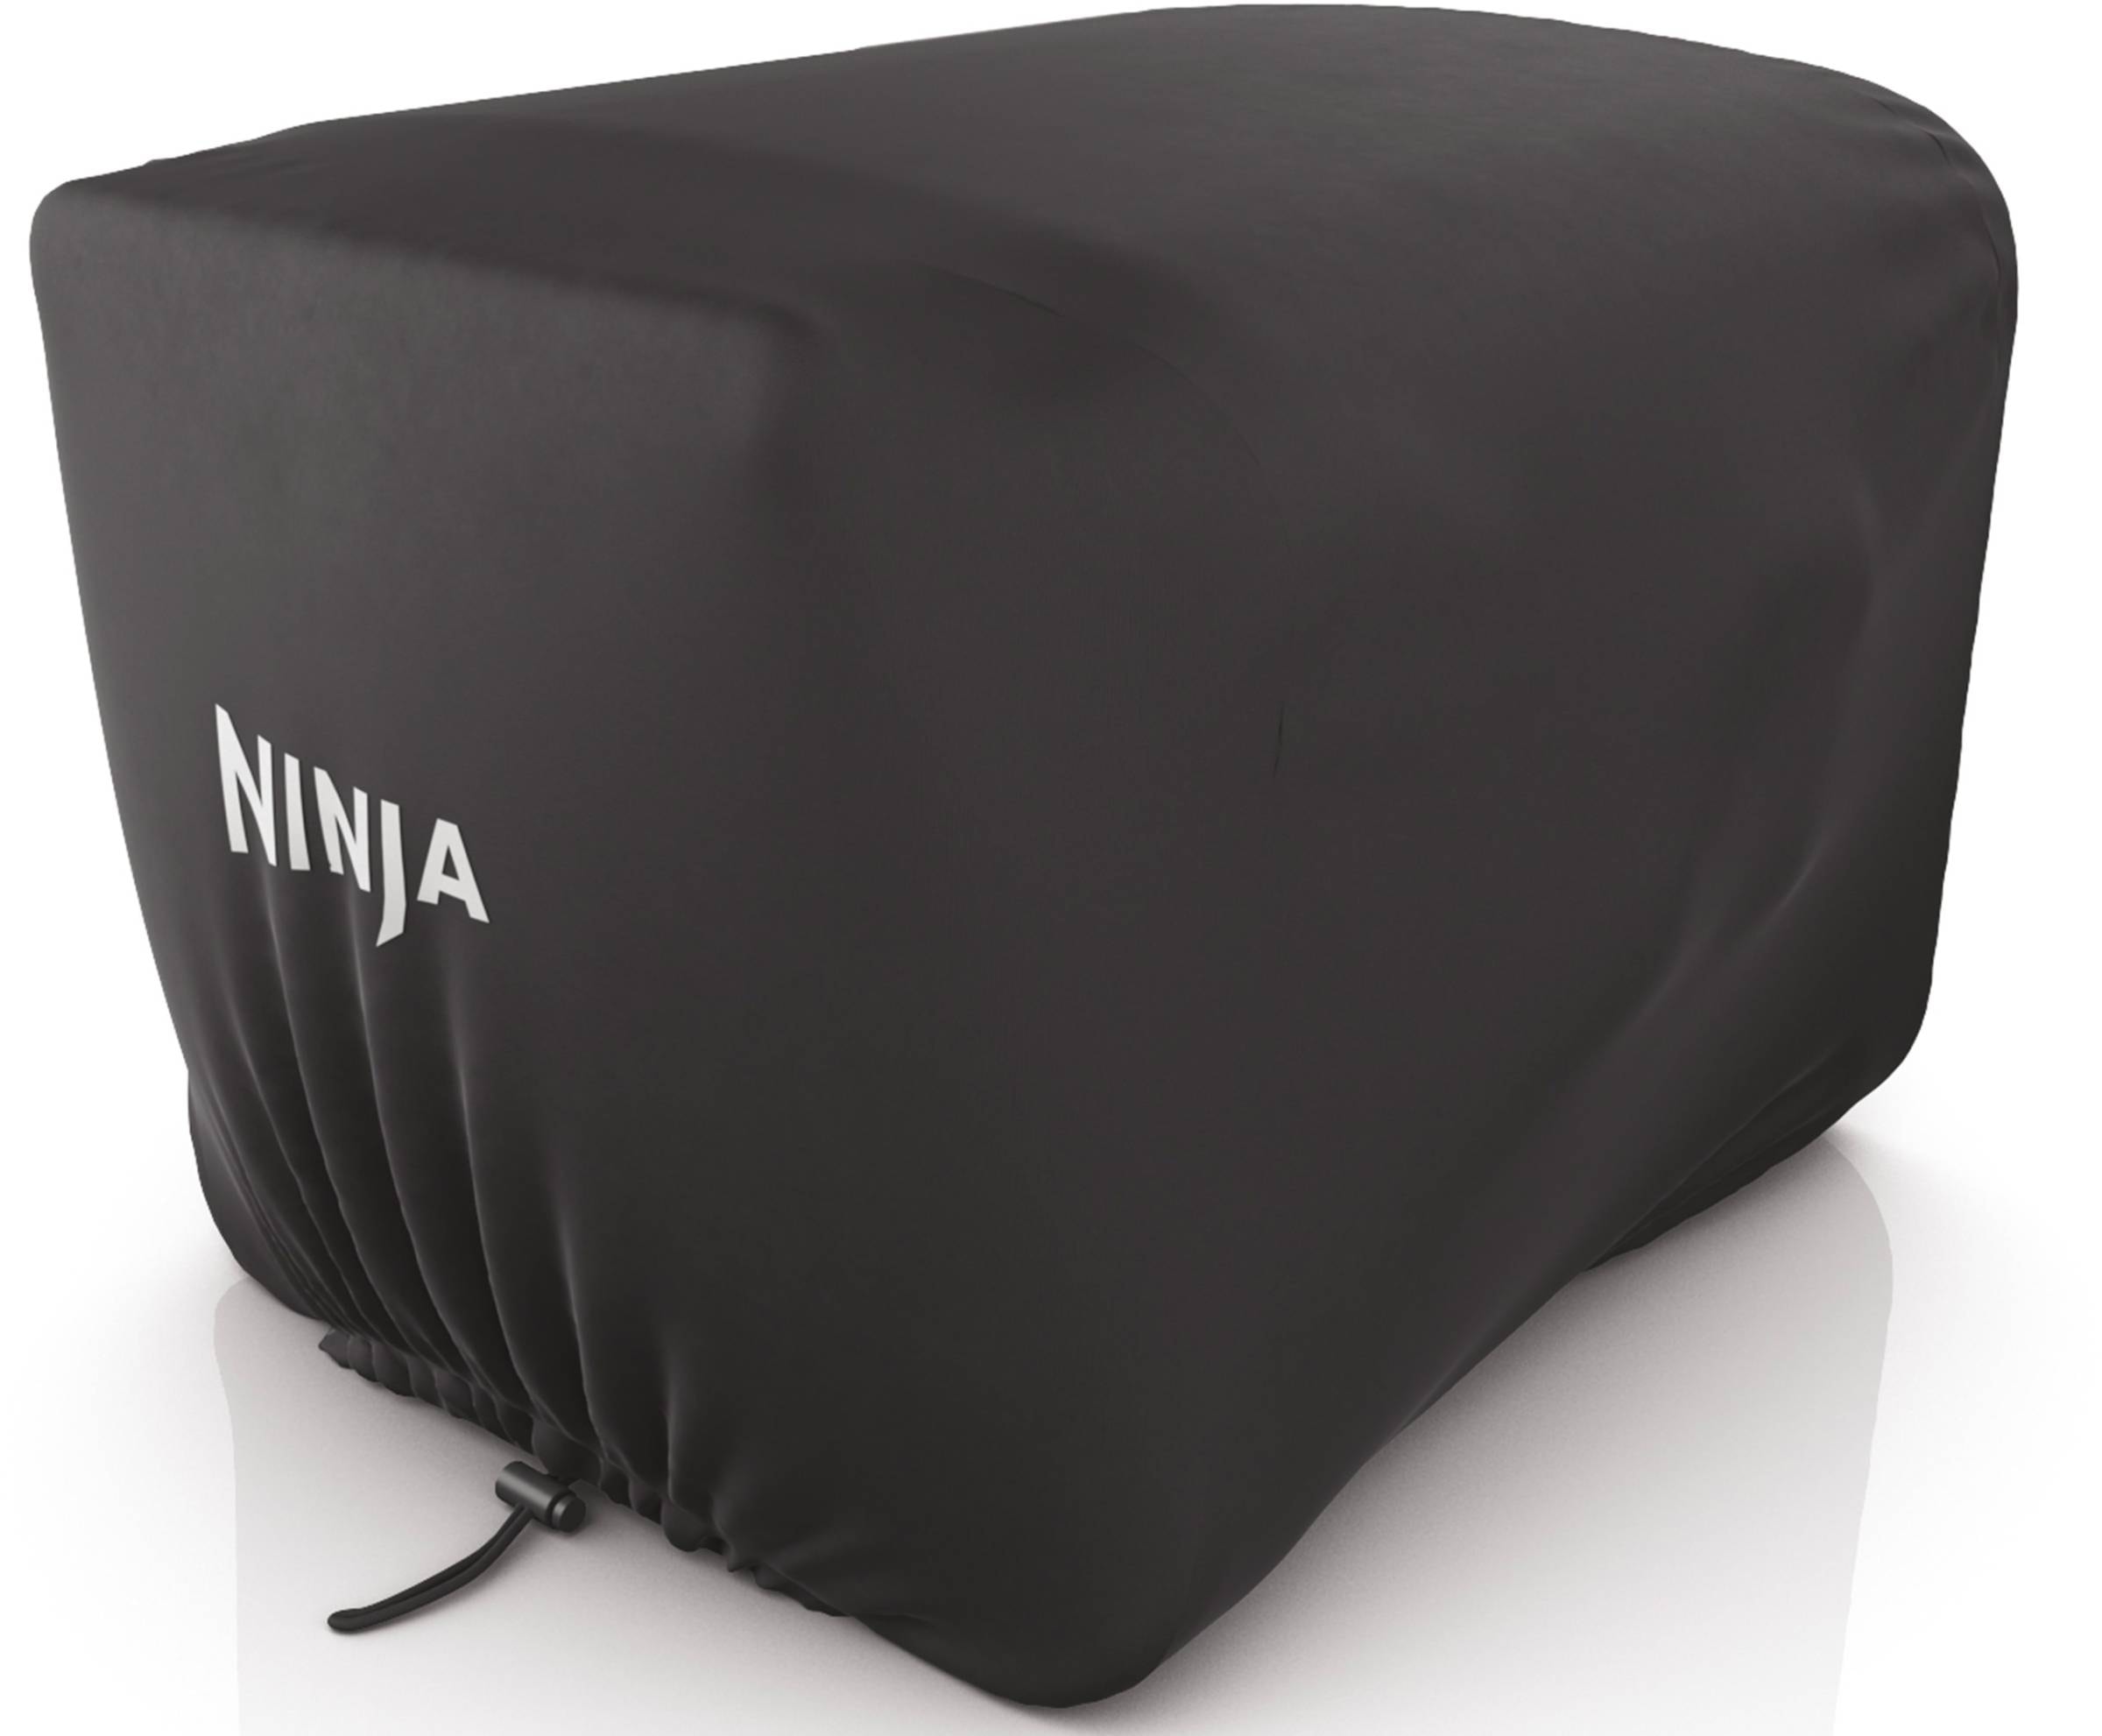 NINJA Accessoire barbecue Housse pour Ninja Woodfire - HOUSSEWOODFIRE